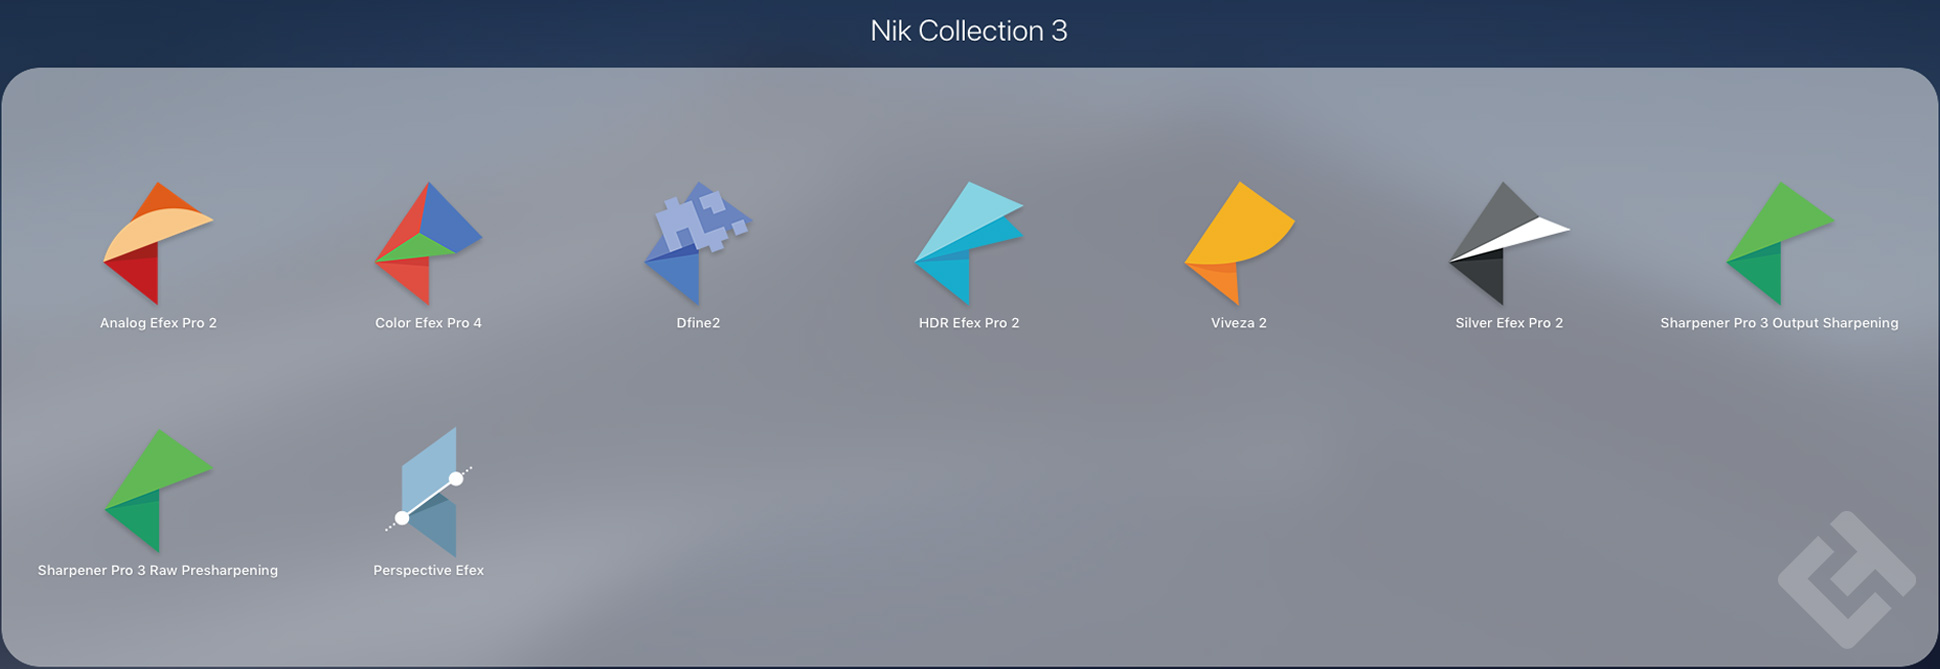 nik collection 3.3